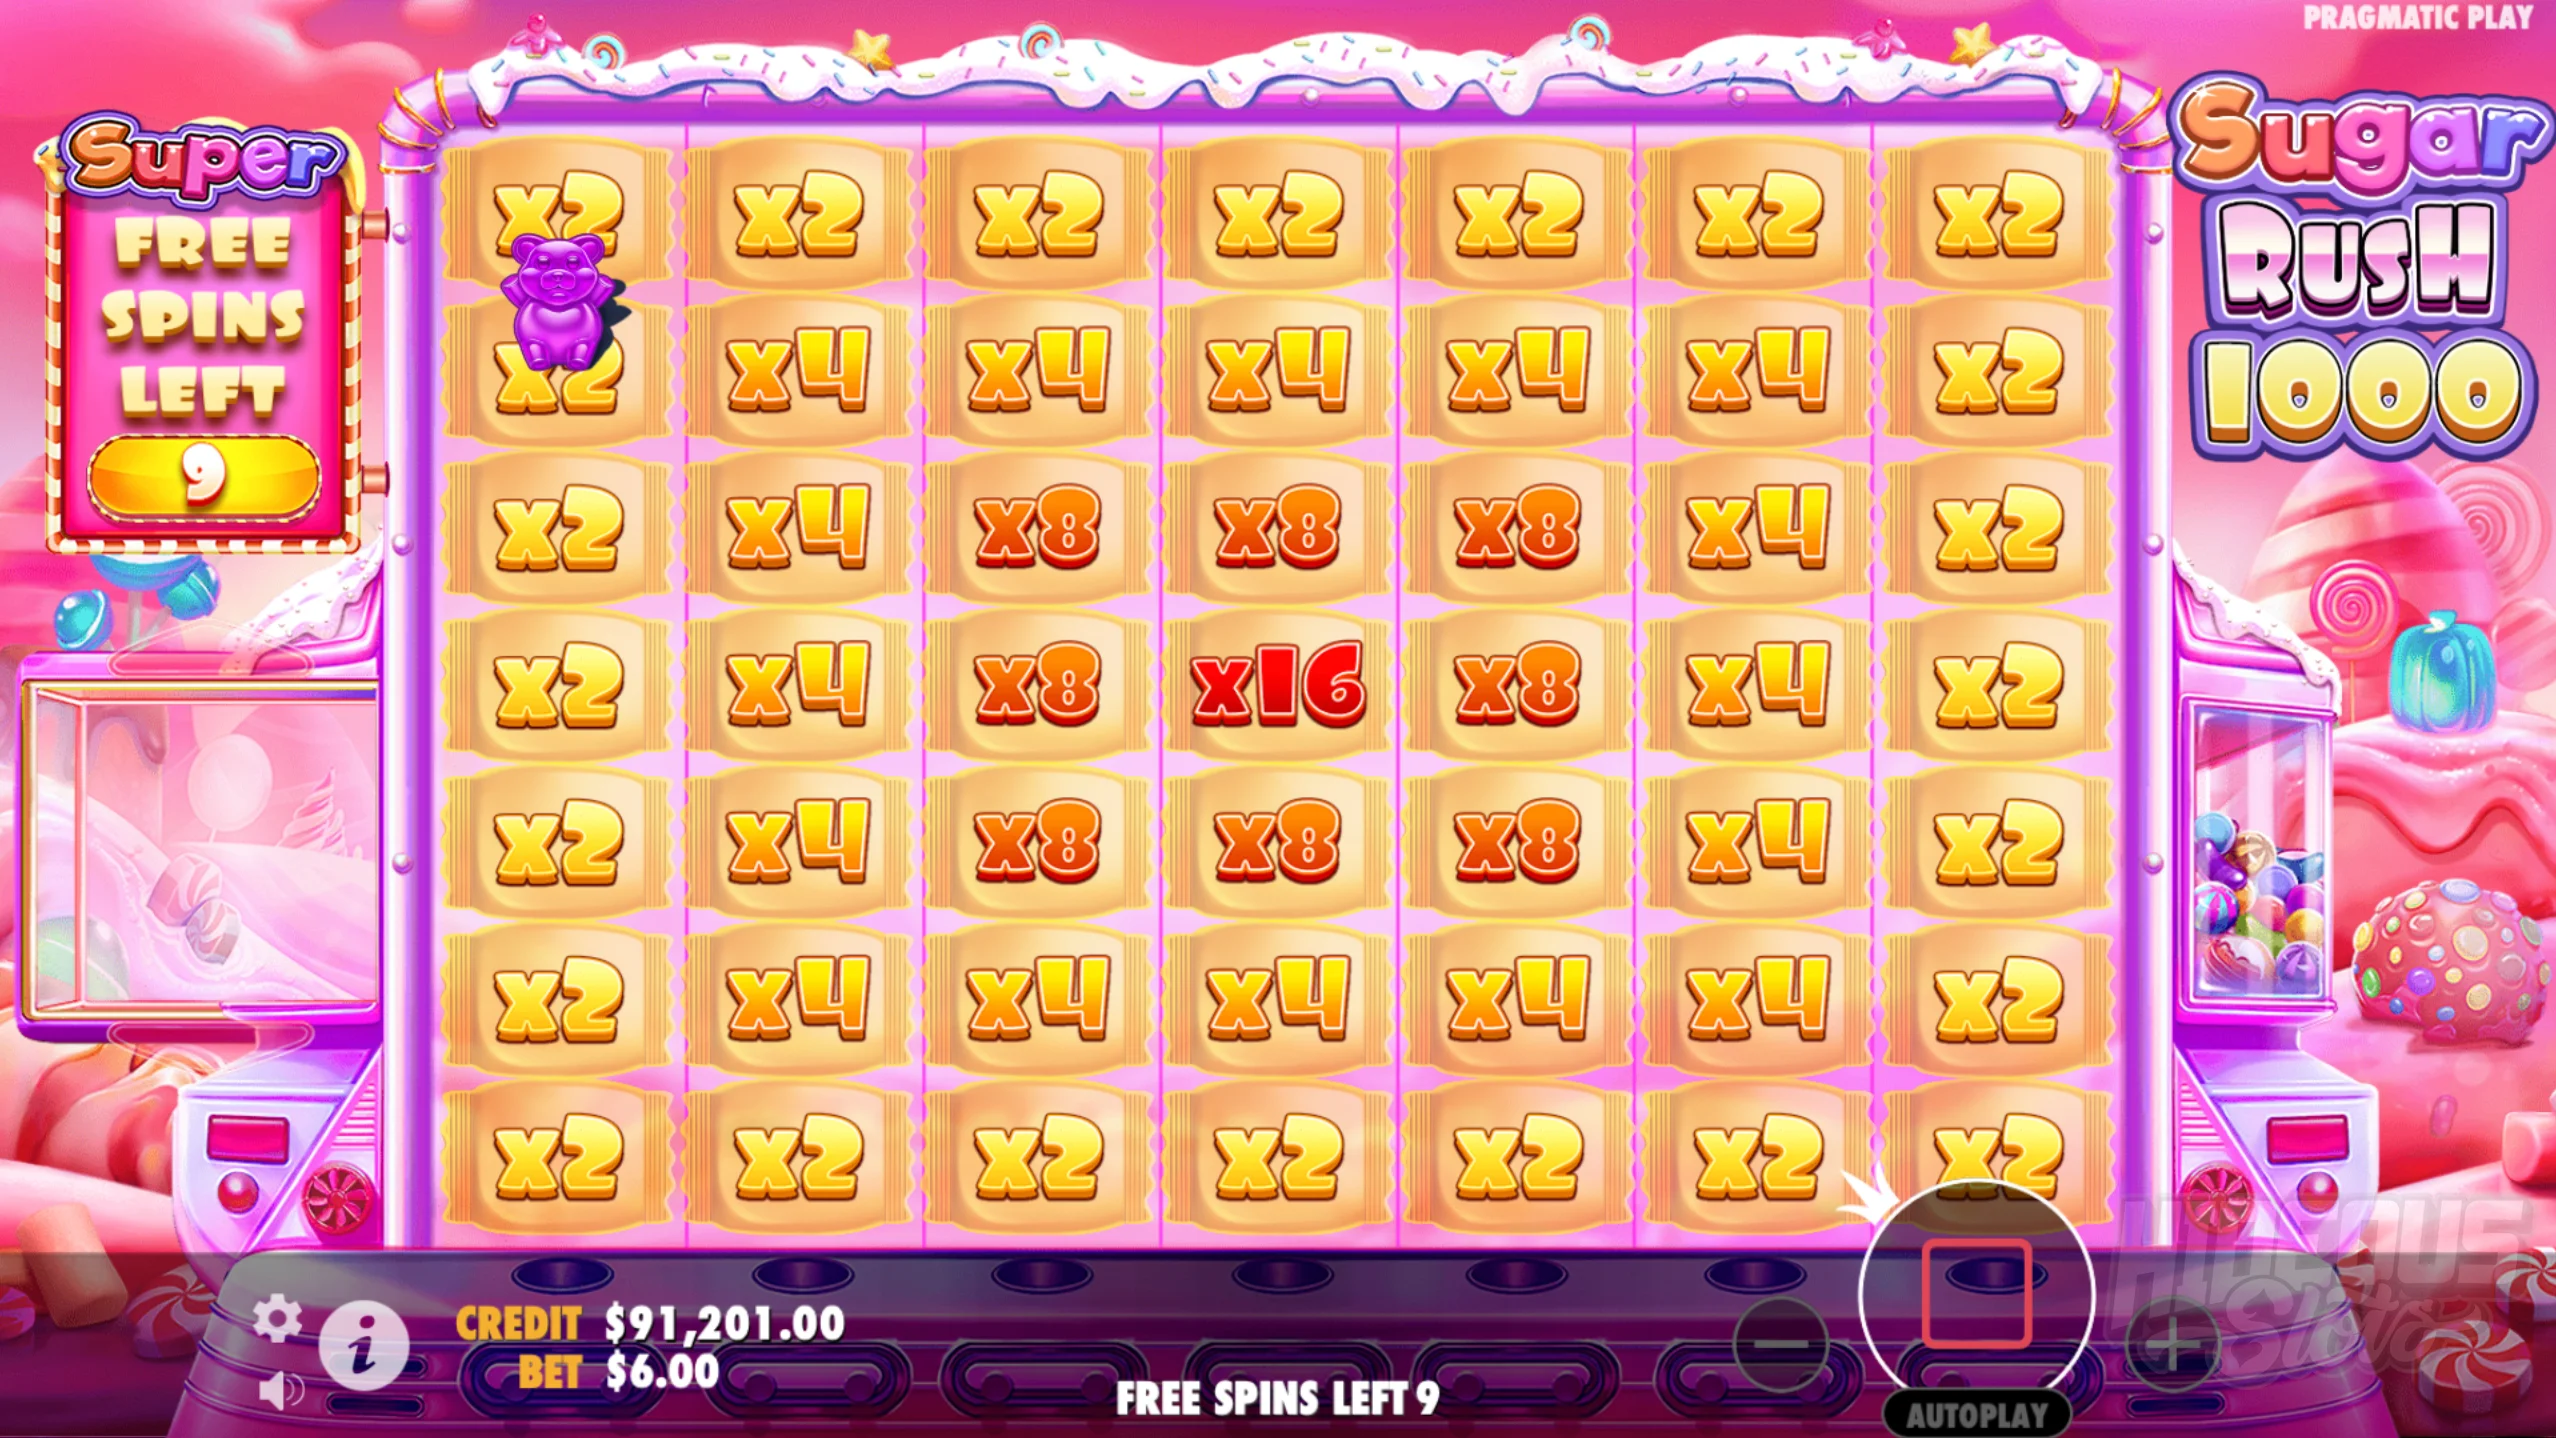 Starting Multipliers are Applied to all Grid Positions During Super Free Spins